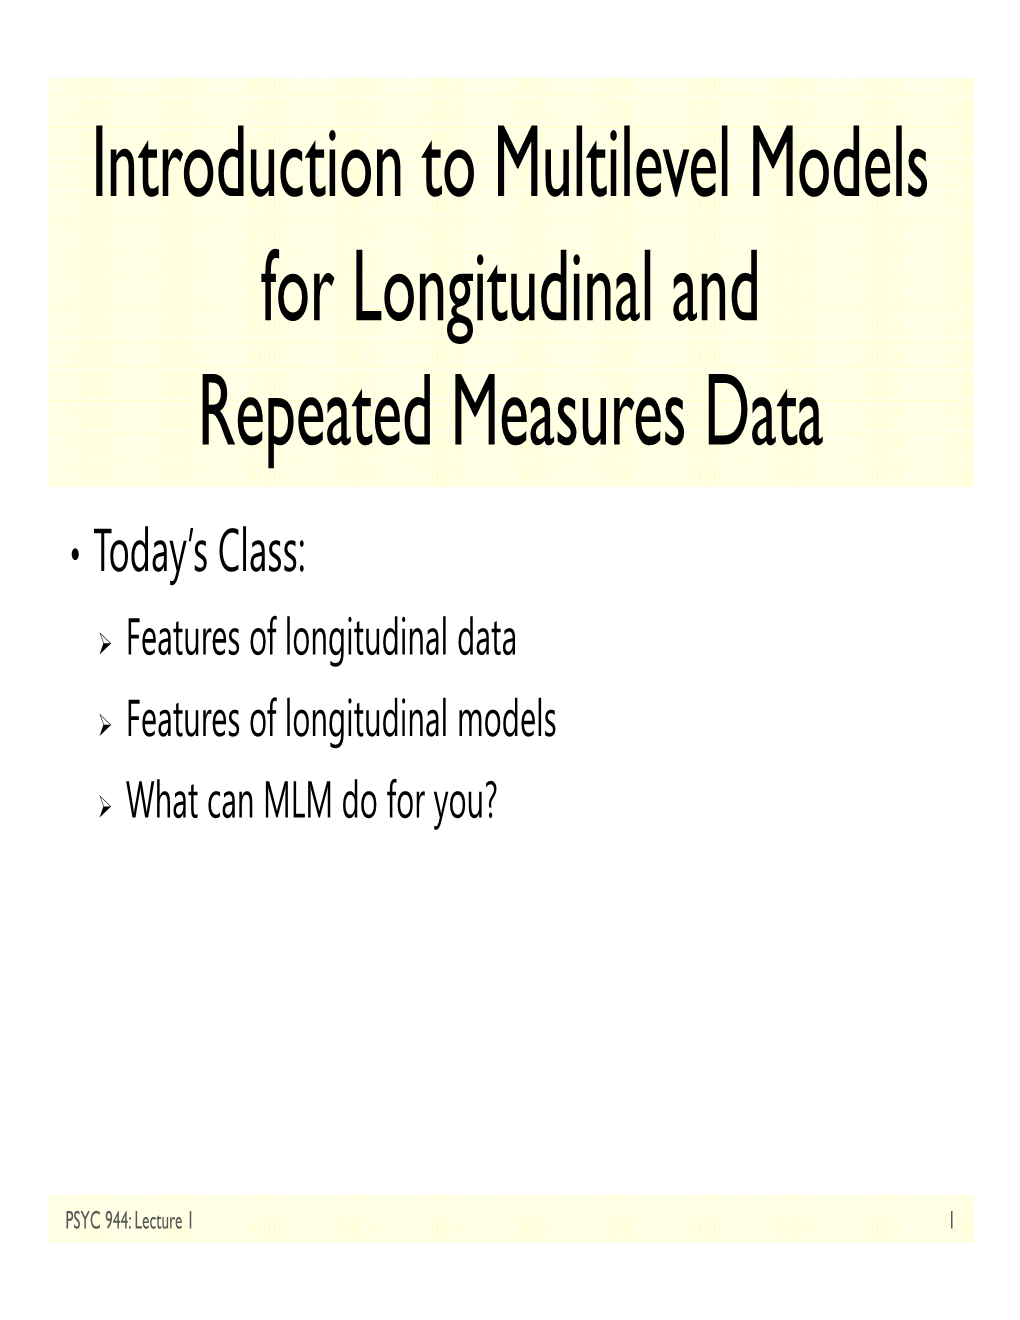 Introduction to Multilevel Models for Longitudinal and Repeated Measures Data